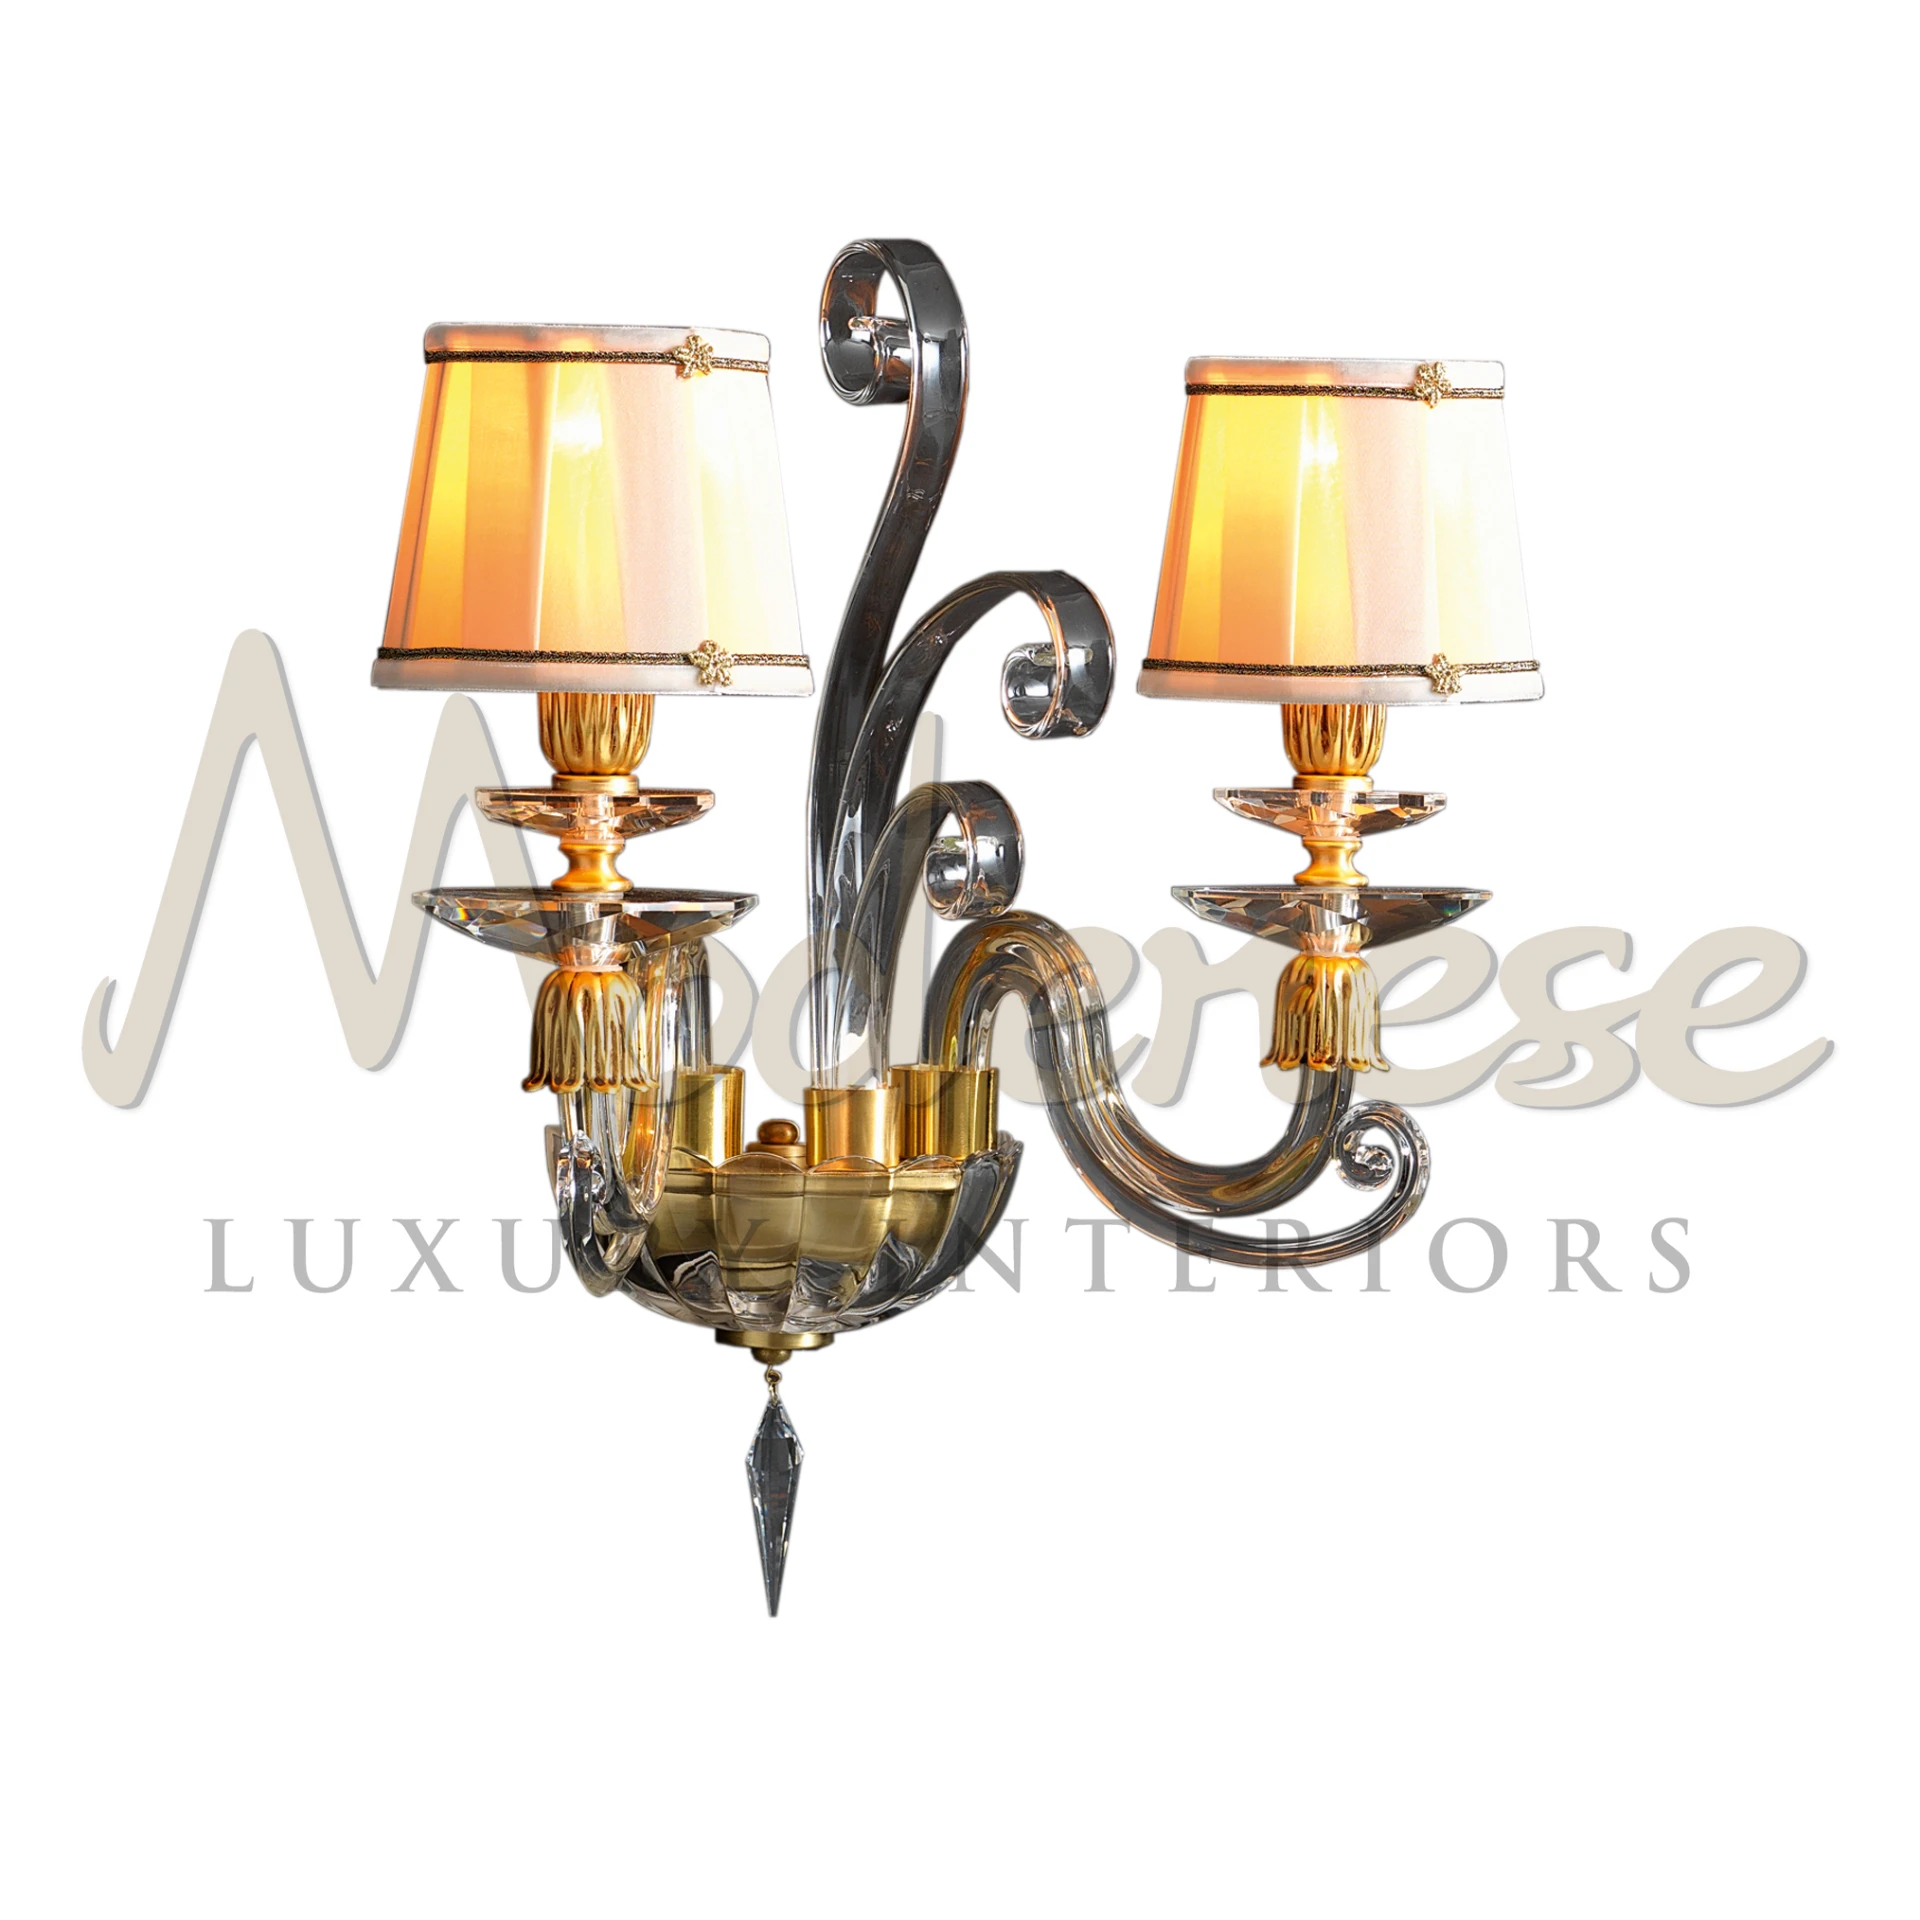 Classic Royal Sconce Lamp in bronze with ornamental details and white shades.